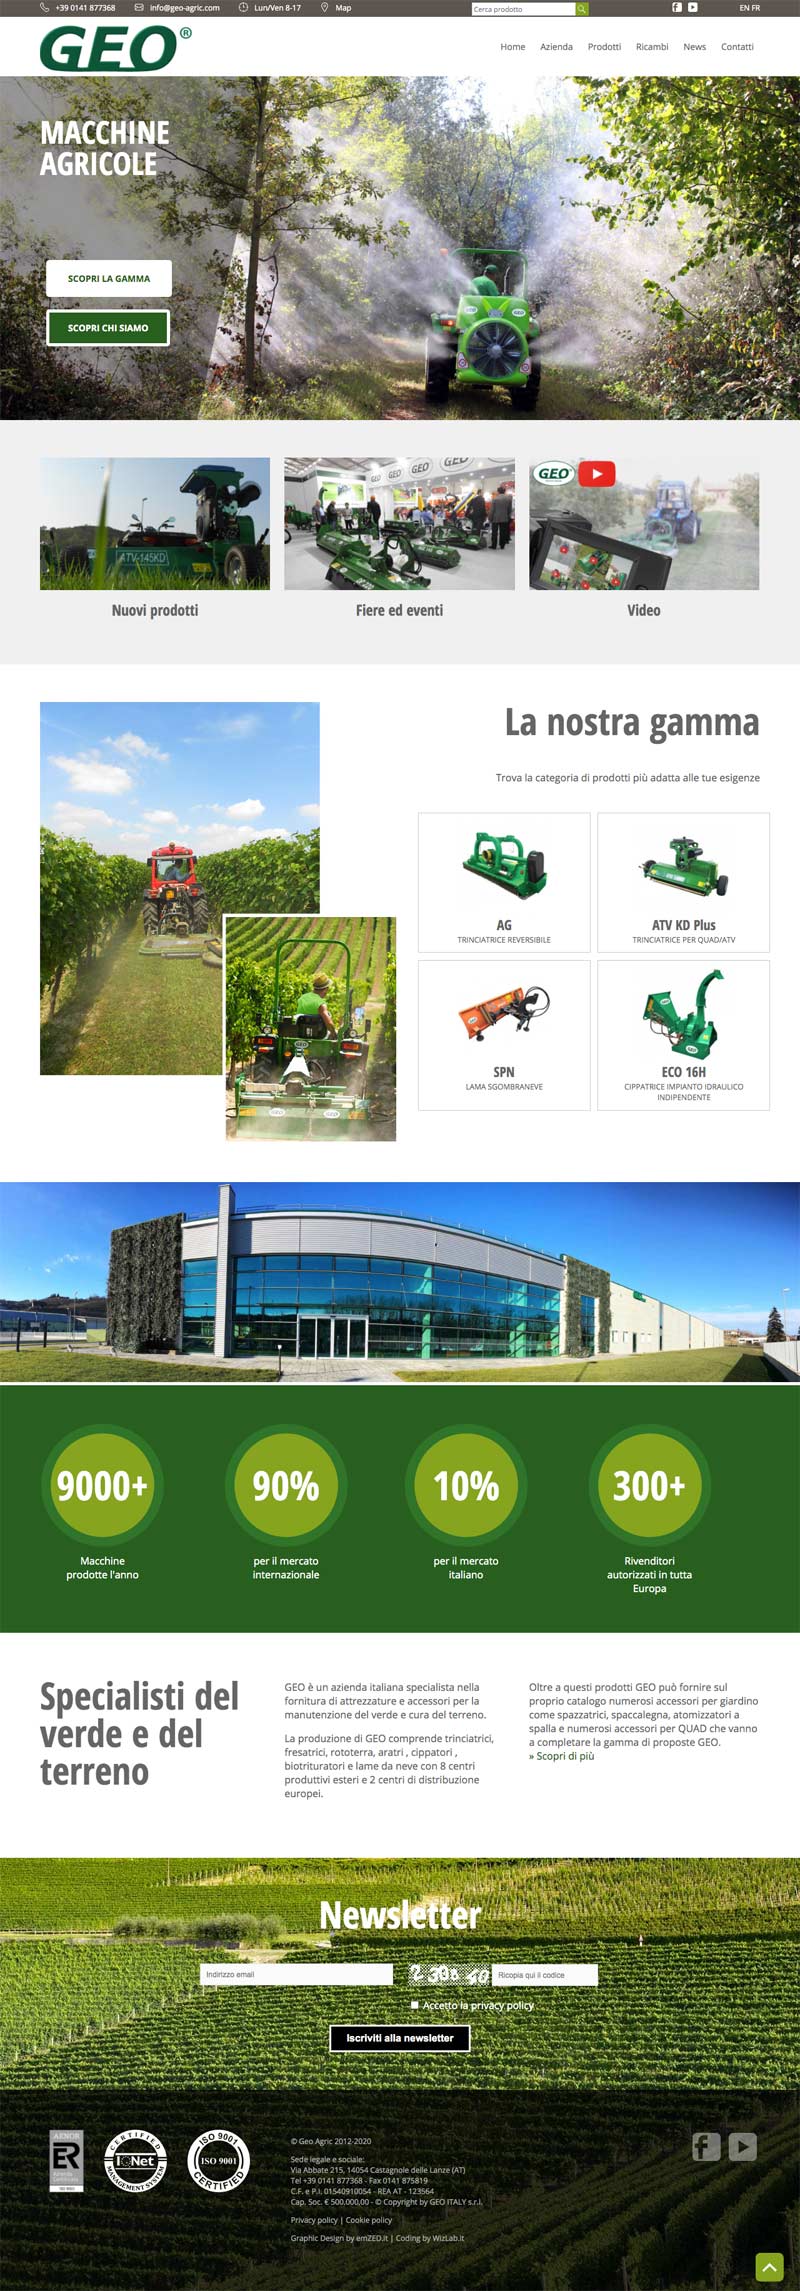 Geo Italy's responsive website, agricultural machinery production